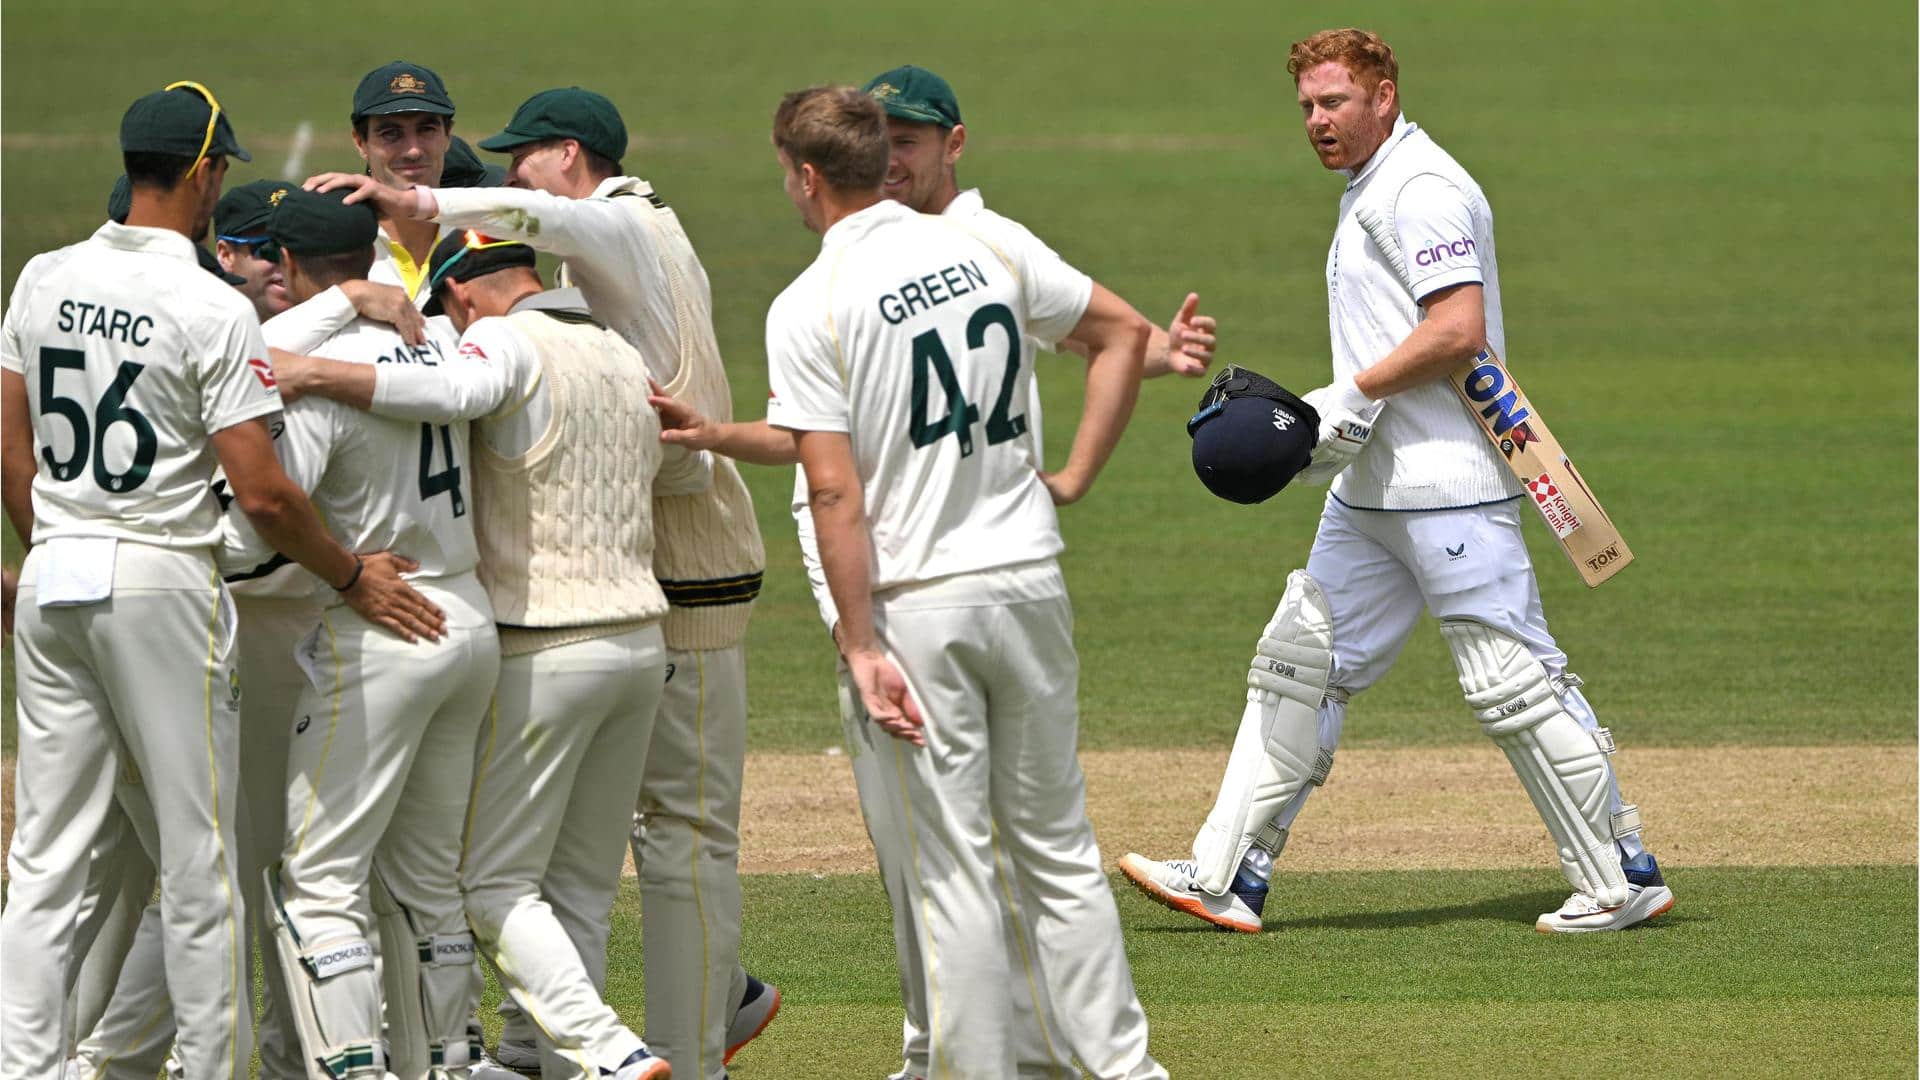 Australia allege 'physical contact' by Lord's members; MCC apologizes: Details